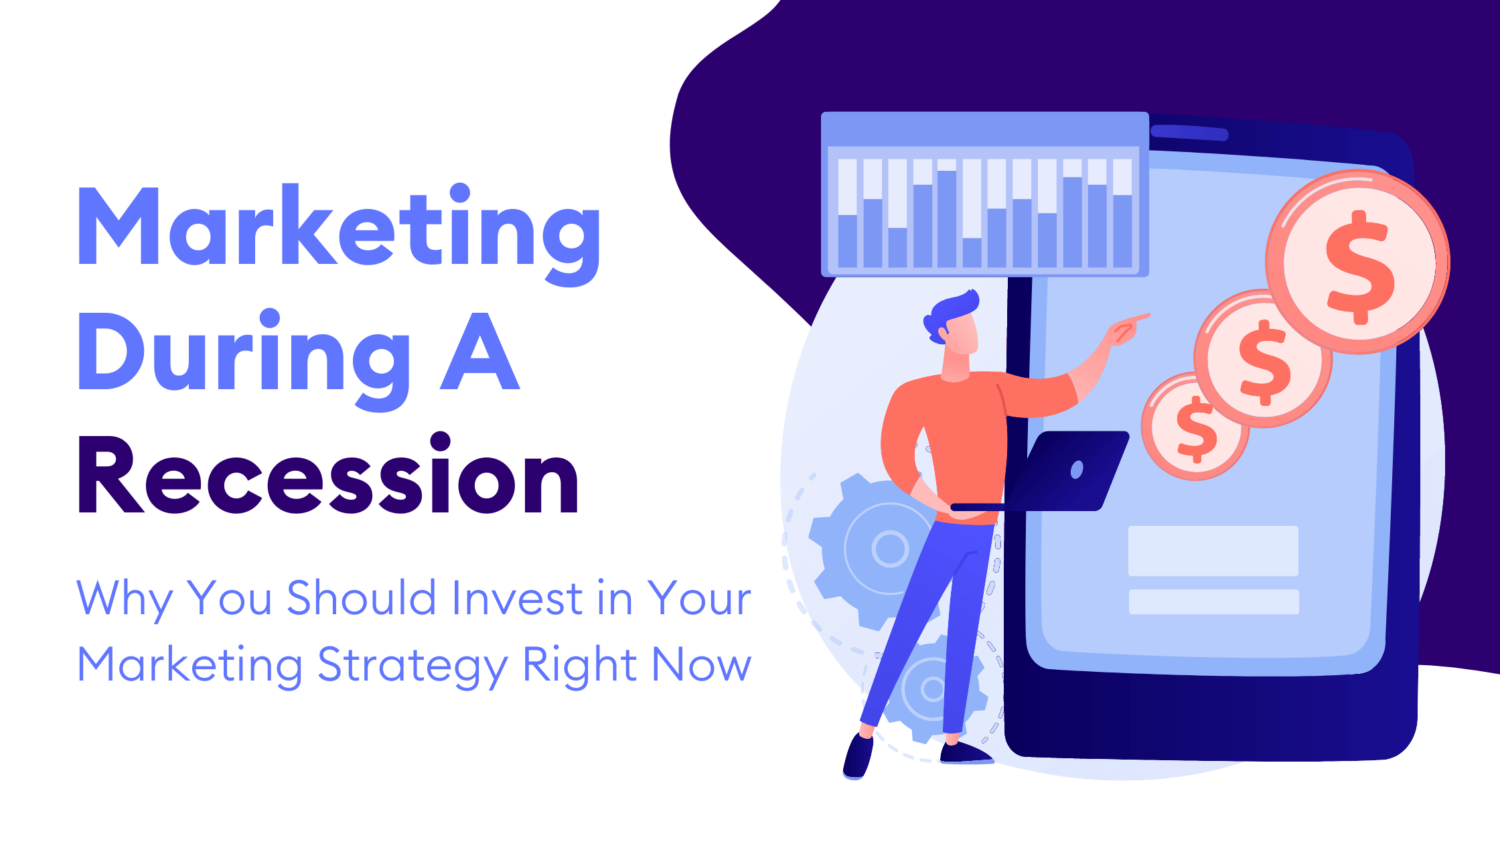 Marketing During a Recession: Why You Should Invest In Your Marketing Strategy Right Now